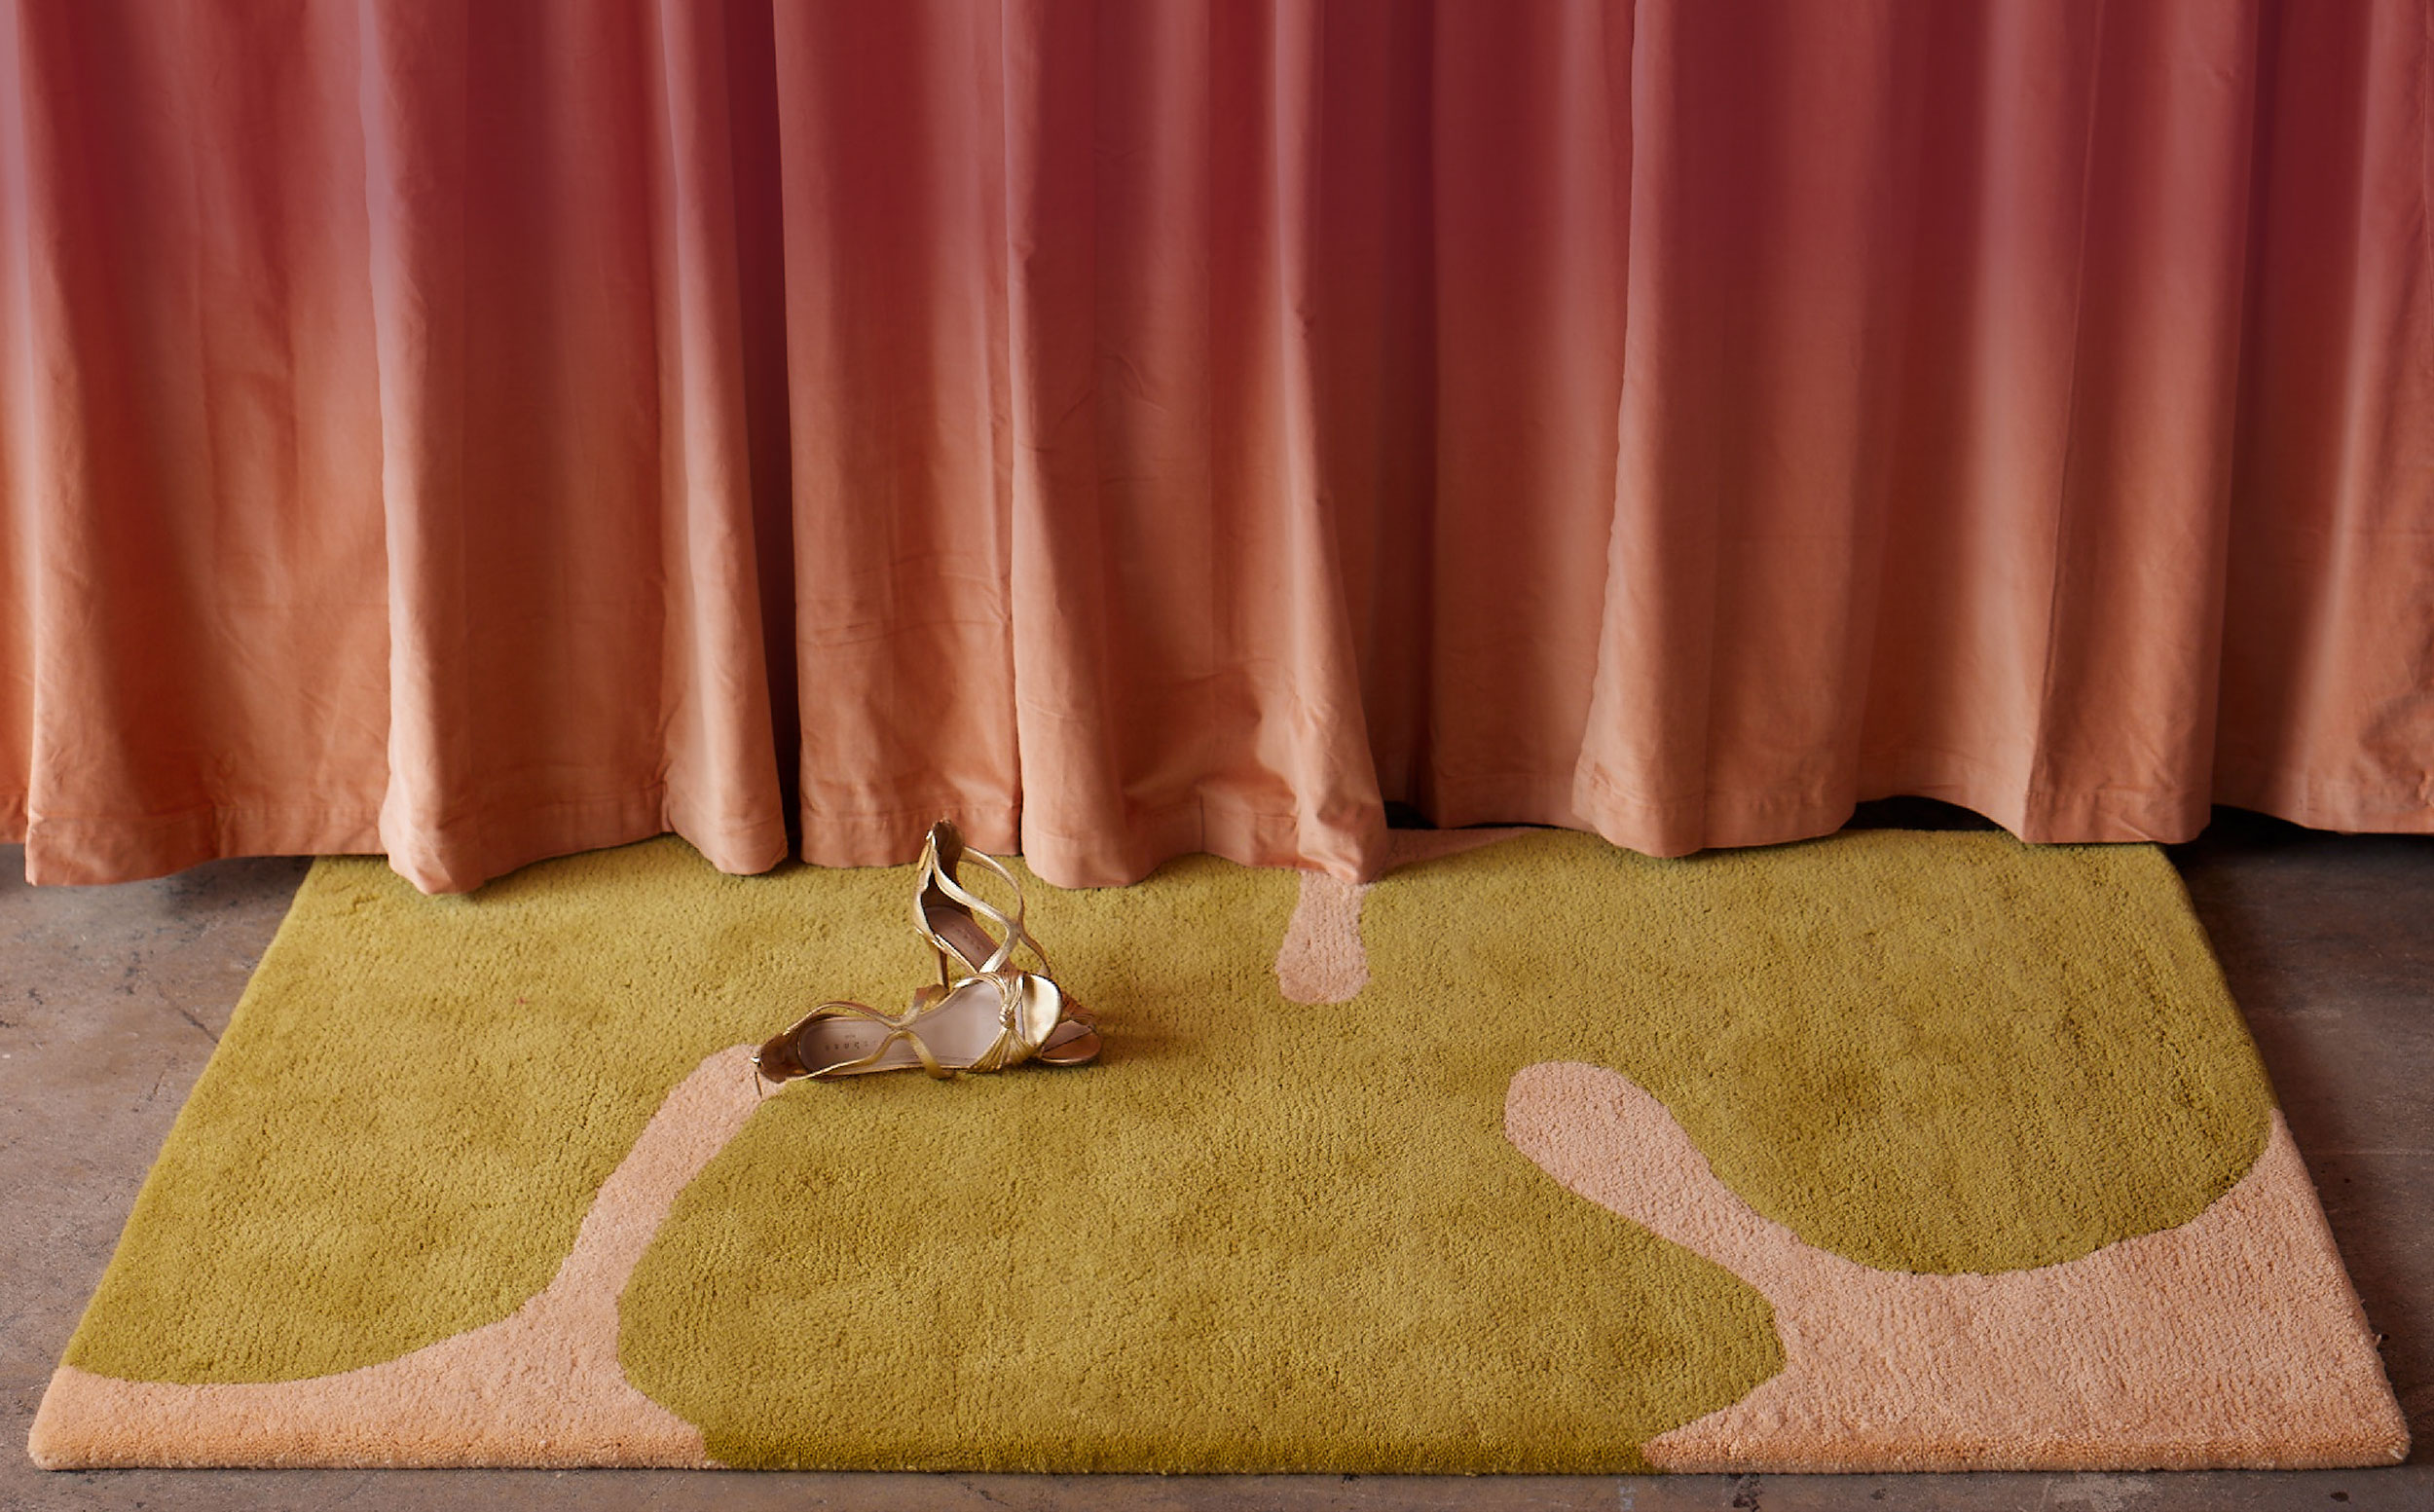 A plush area rug with modern shapes lays below a rose colored curtain